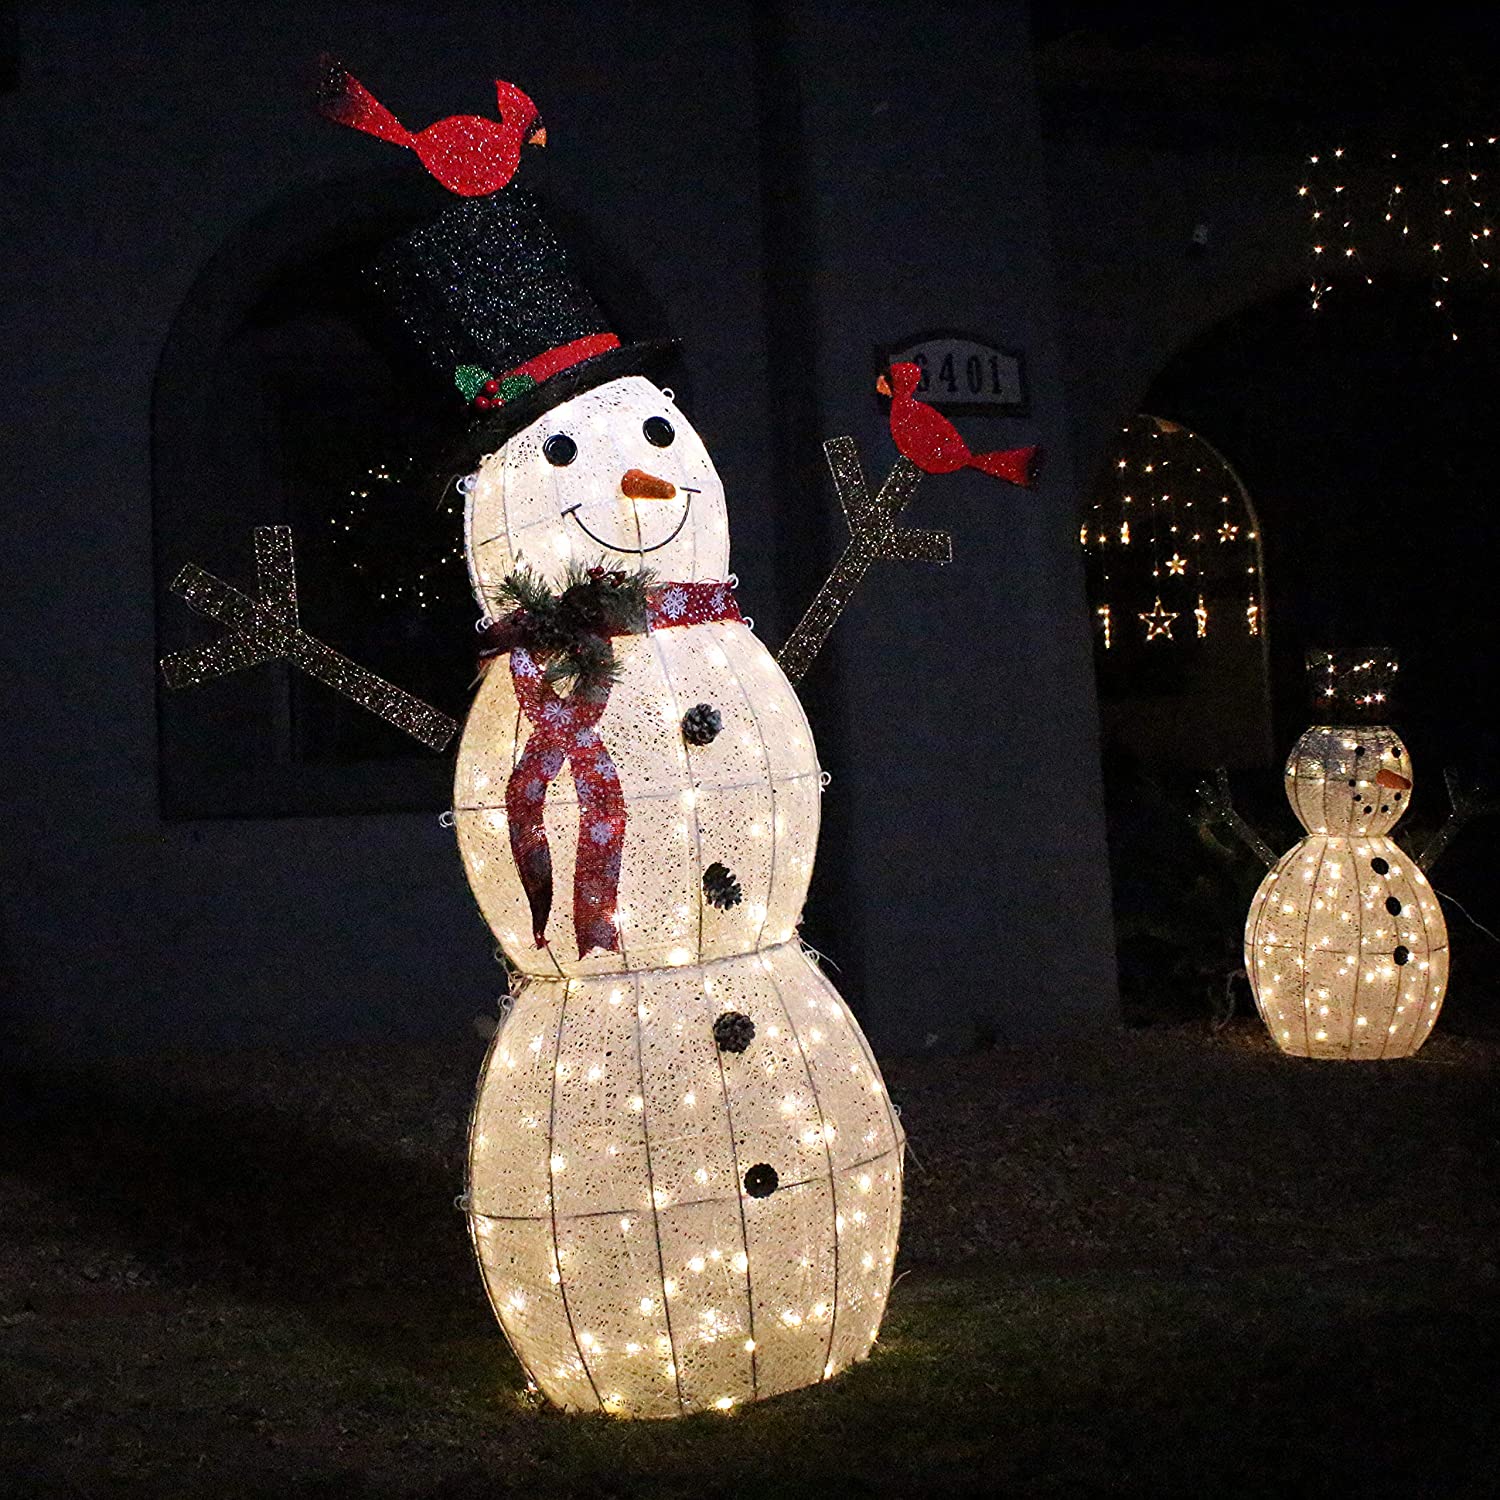 Christmas Eve Night Decor Christmas Event Decoration Joiedomi 5ft Cotton Snowman 170 LED Warm White Yard Light for Christmas Outdoor Yard Garden Decorations 